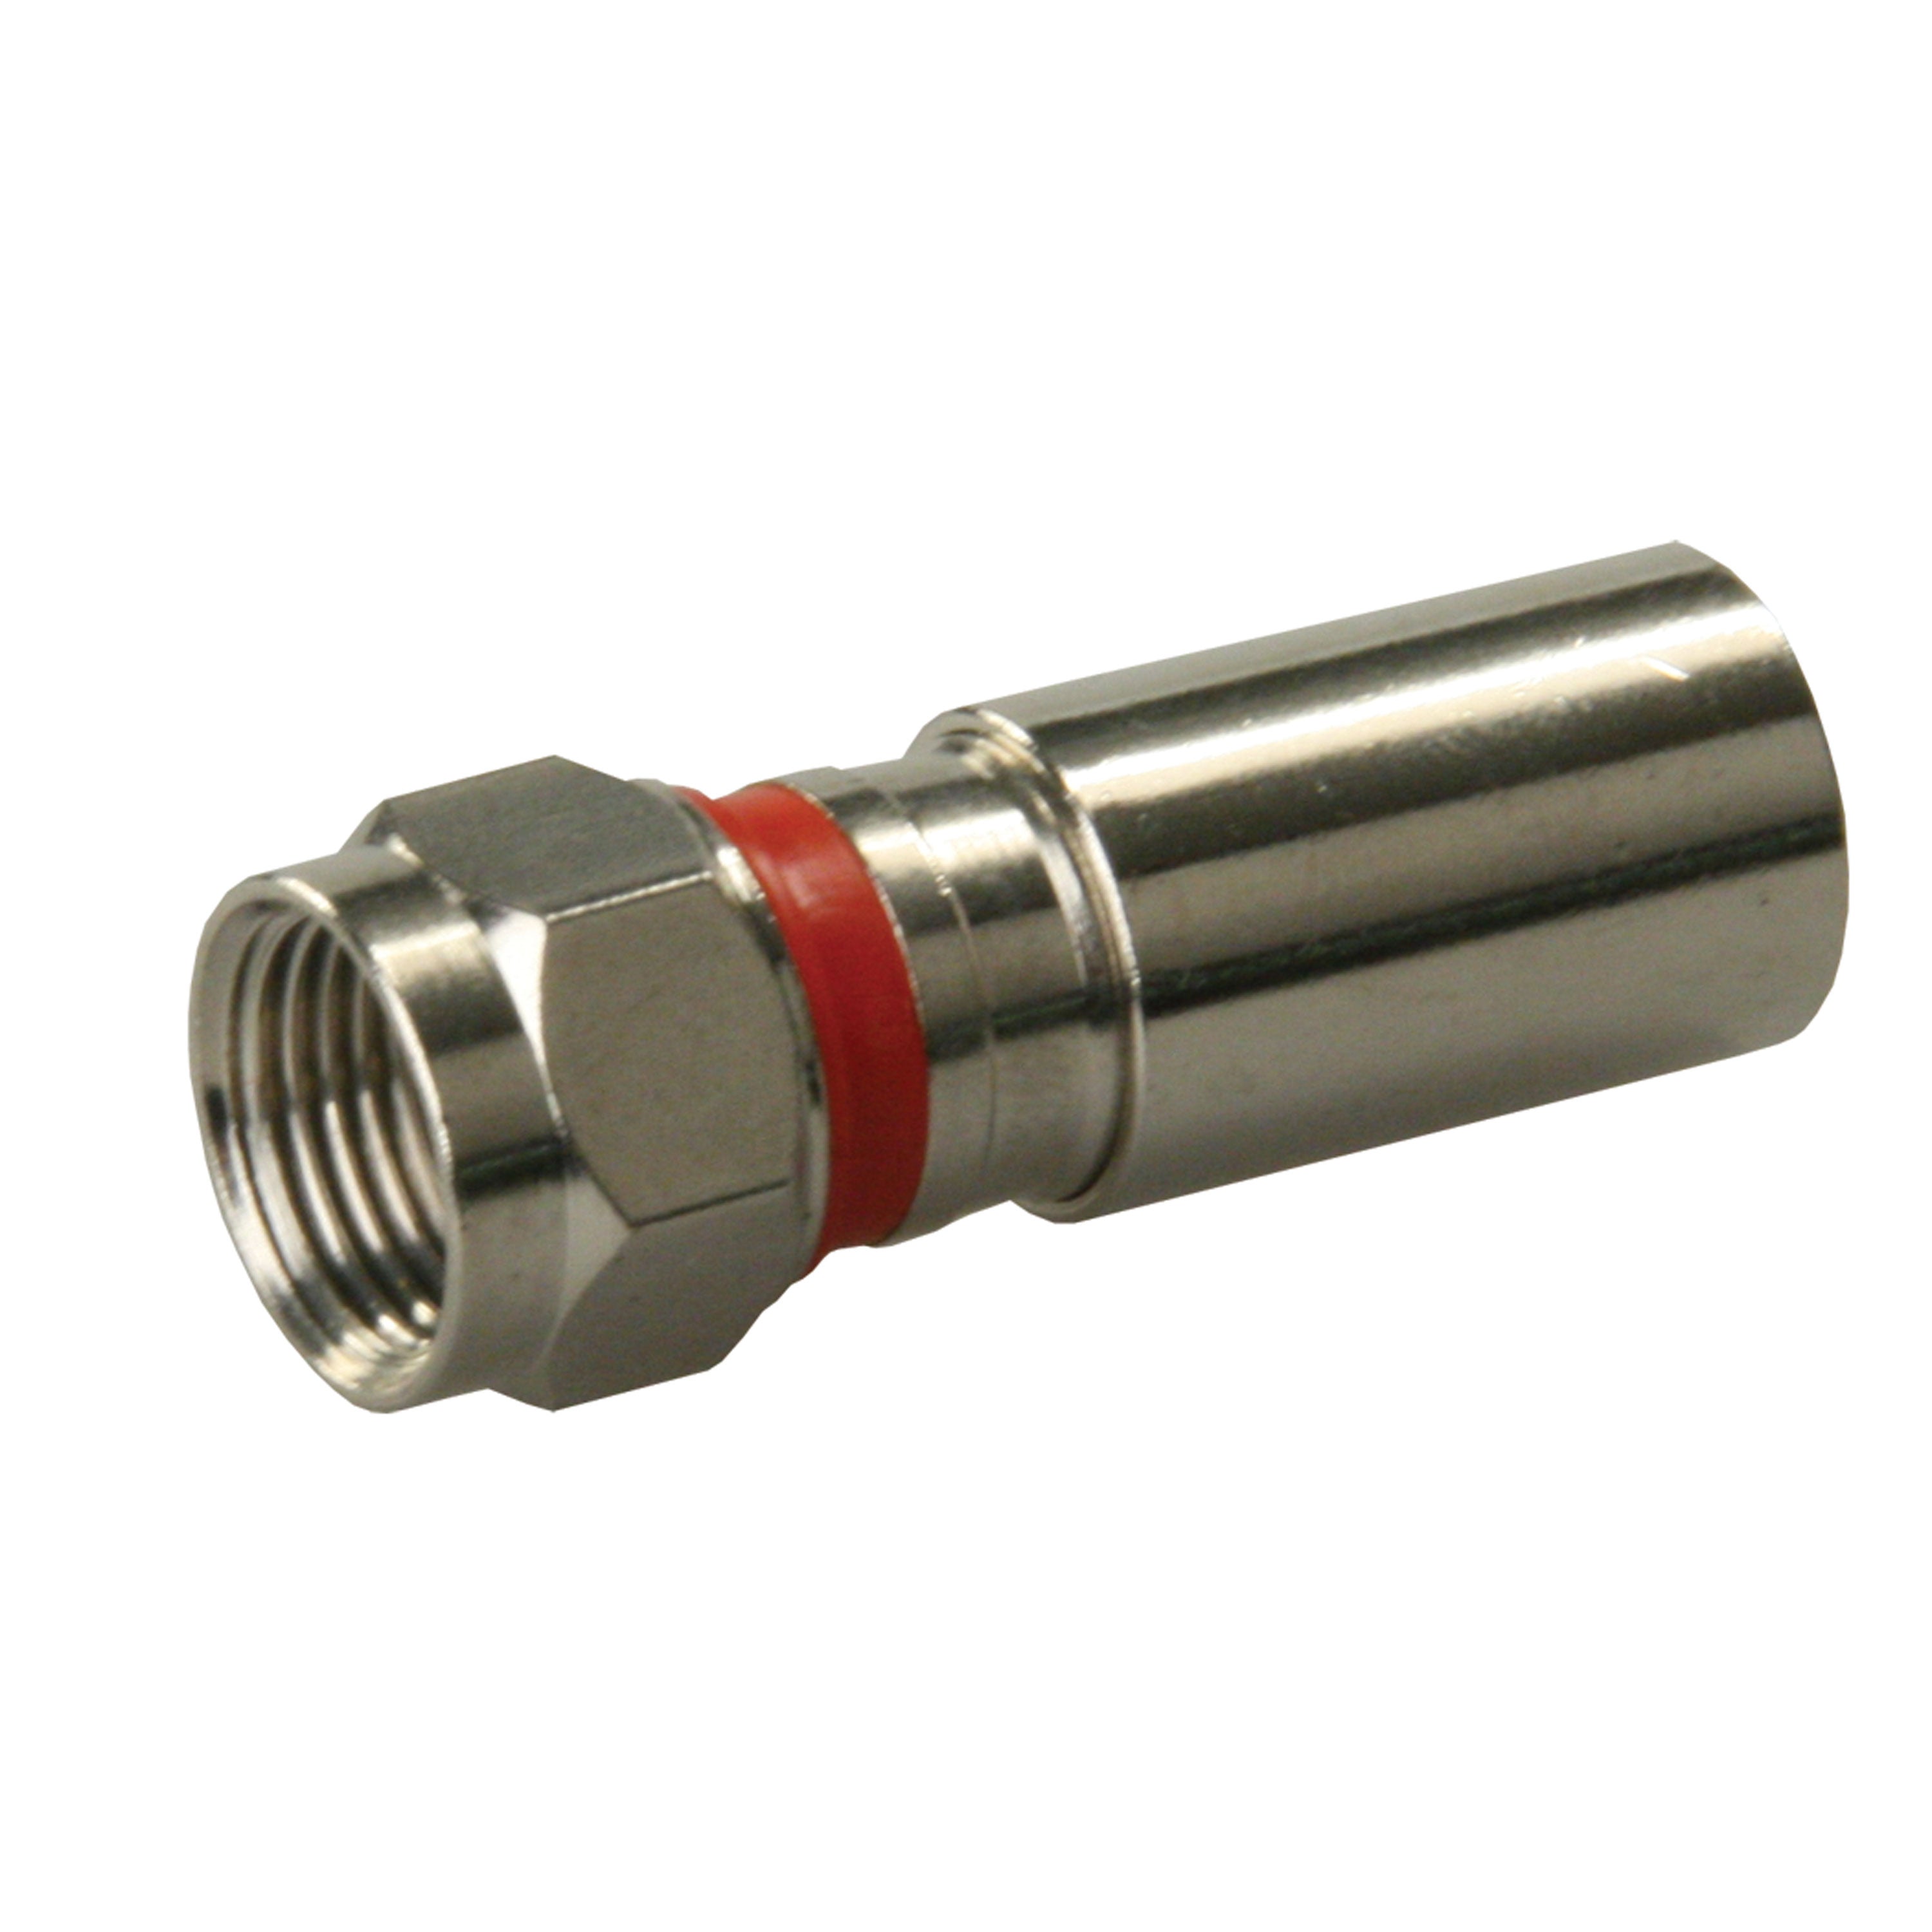 JR Products 47285 RG59 HD/Satellite Compression Fitting